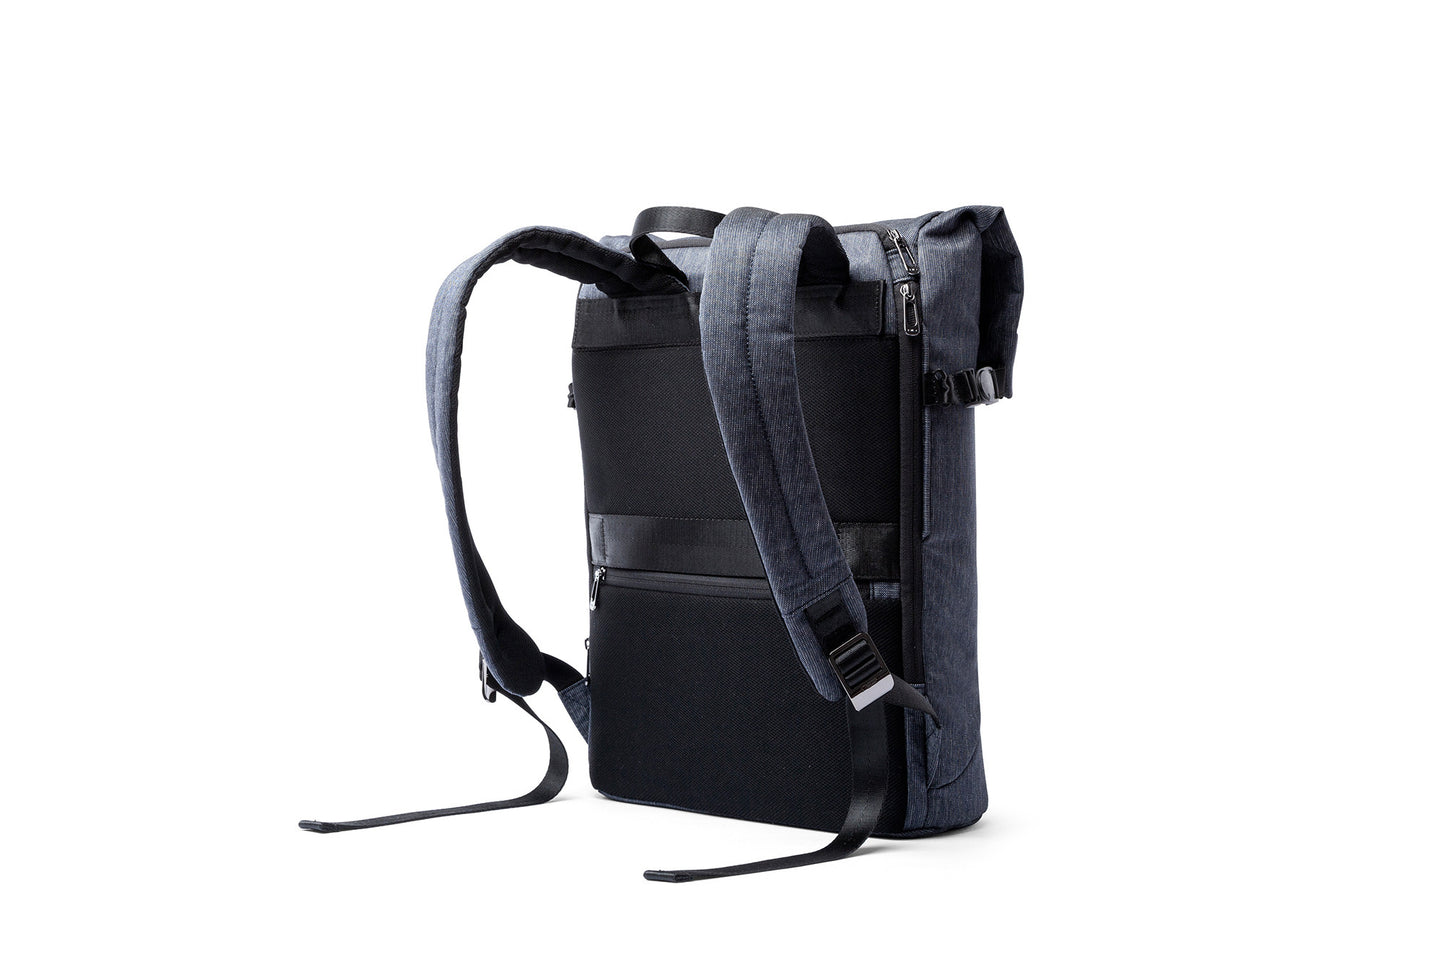 D2 Roll Top BackPack niid×URBANATURE D2 ロールトップ リュック バックパック ニード